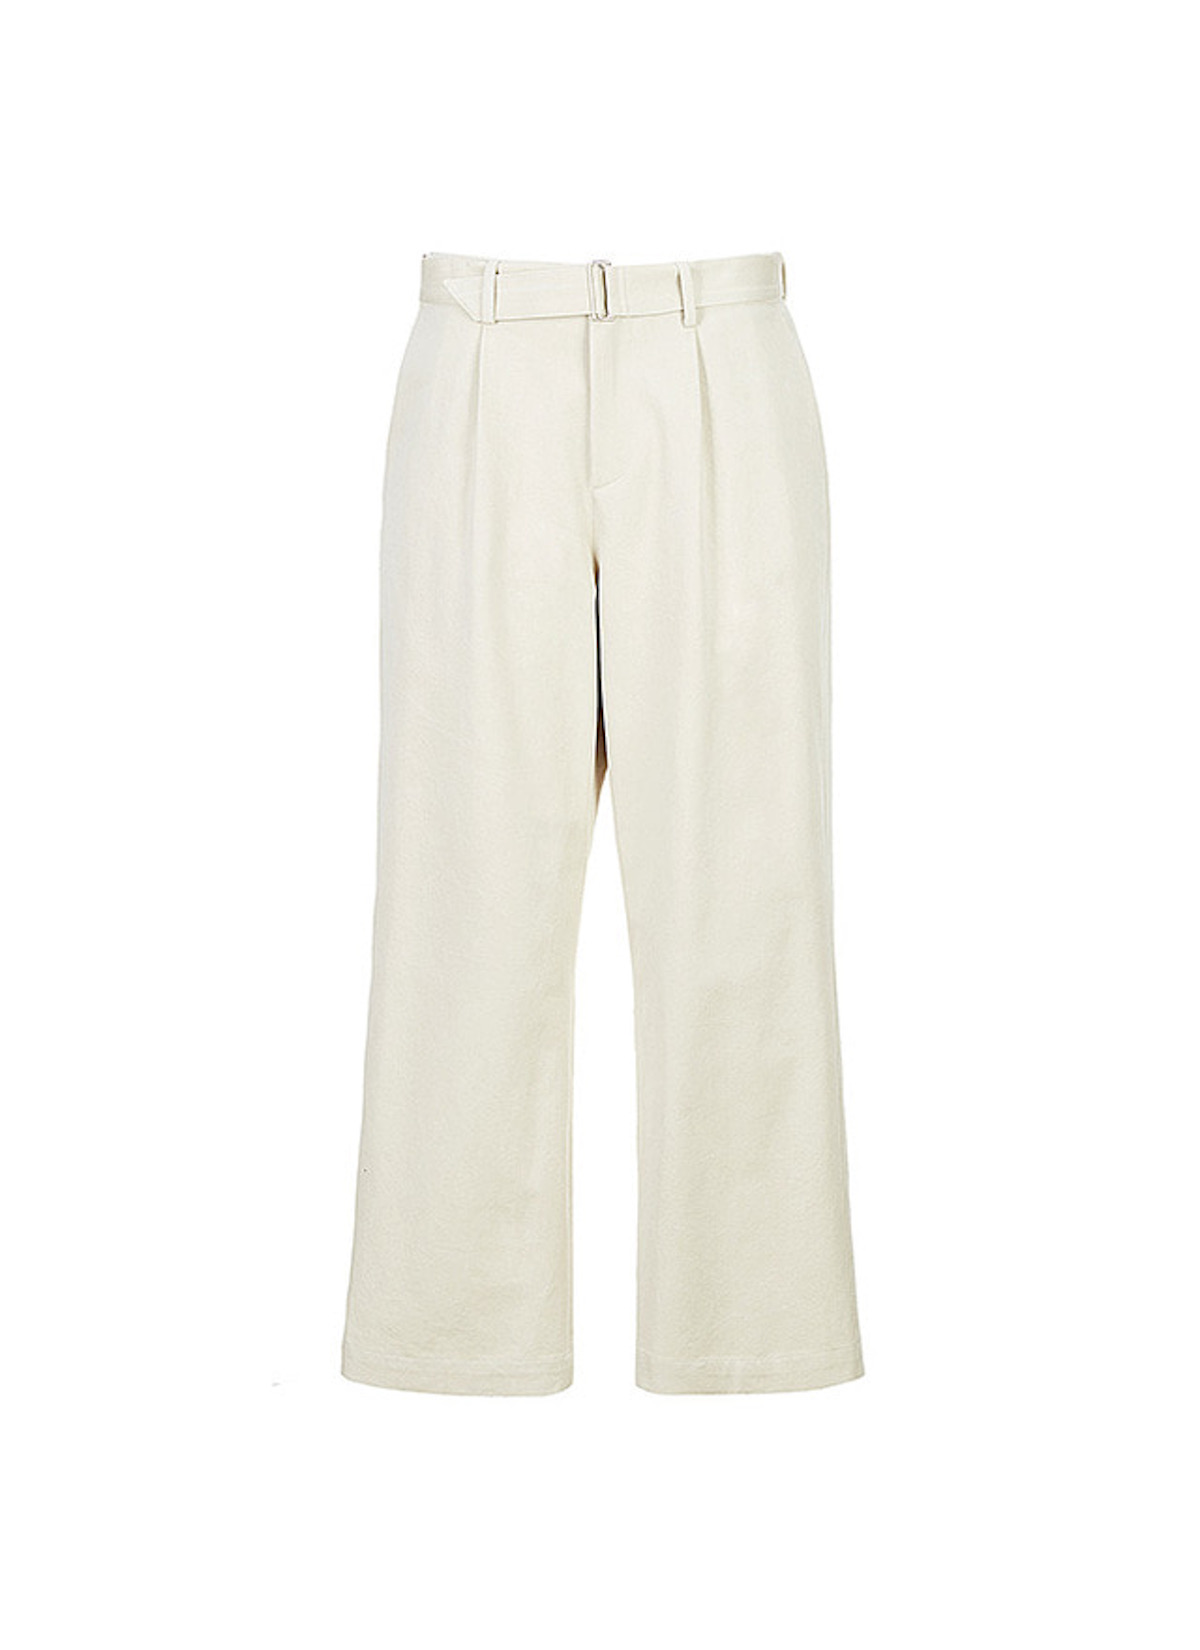 BELTED PANTS IVORY